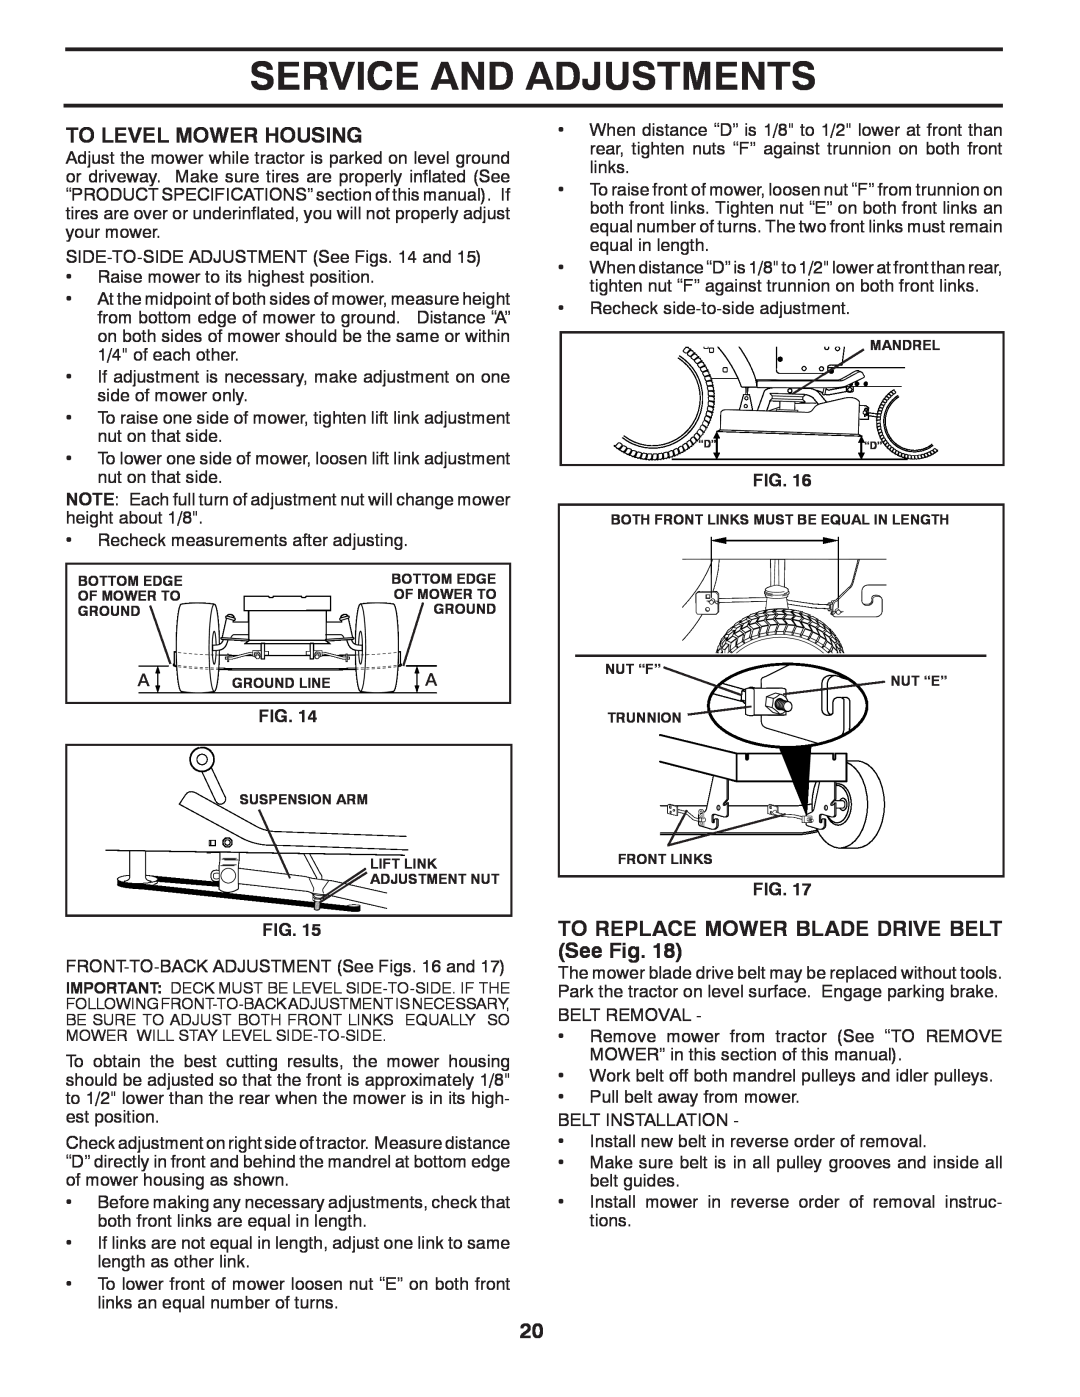 Murray 96017000500 manual To Level Mower Housing, TO REPLACE MOWER BLADE DRIVE BELT See Fig, Service And Adjustments 